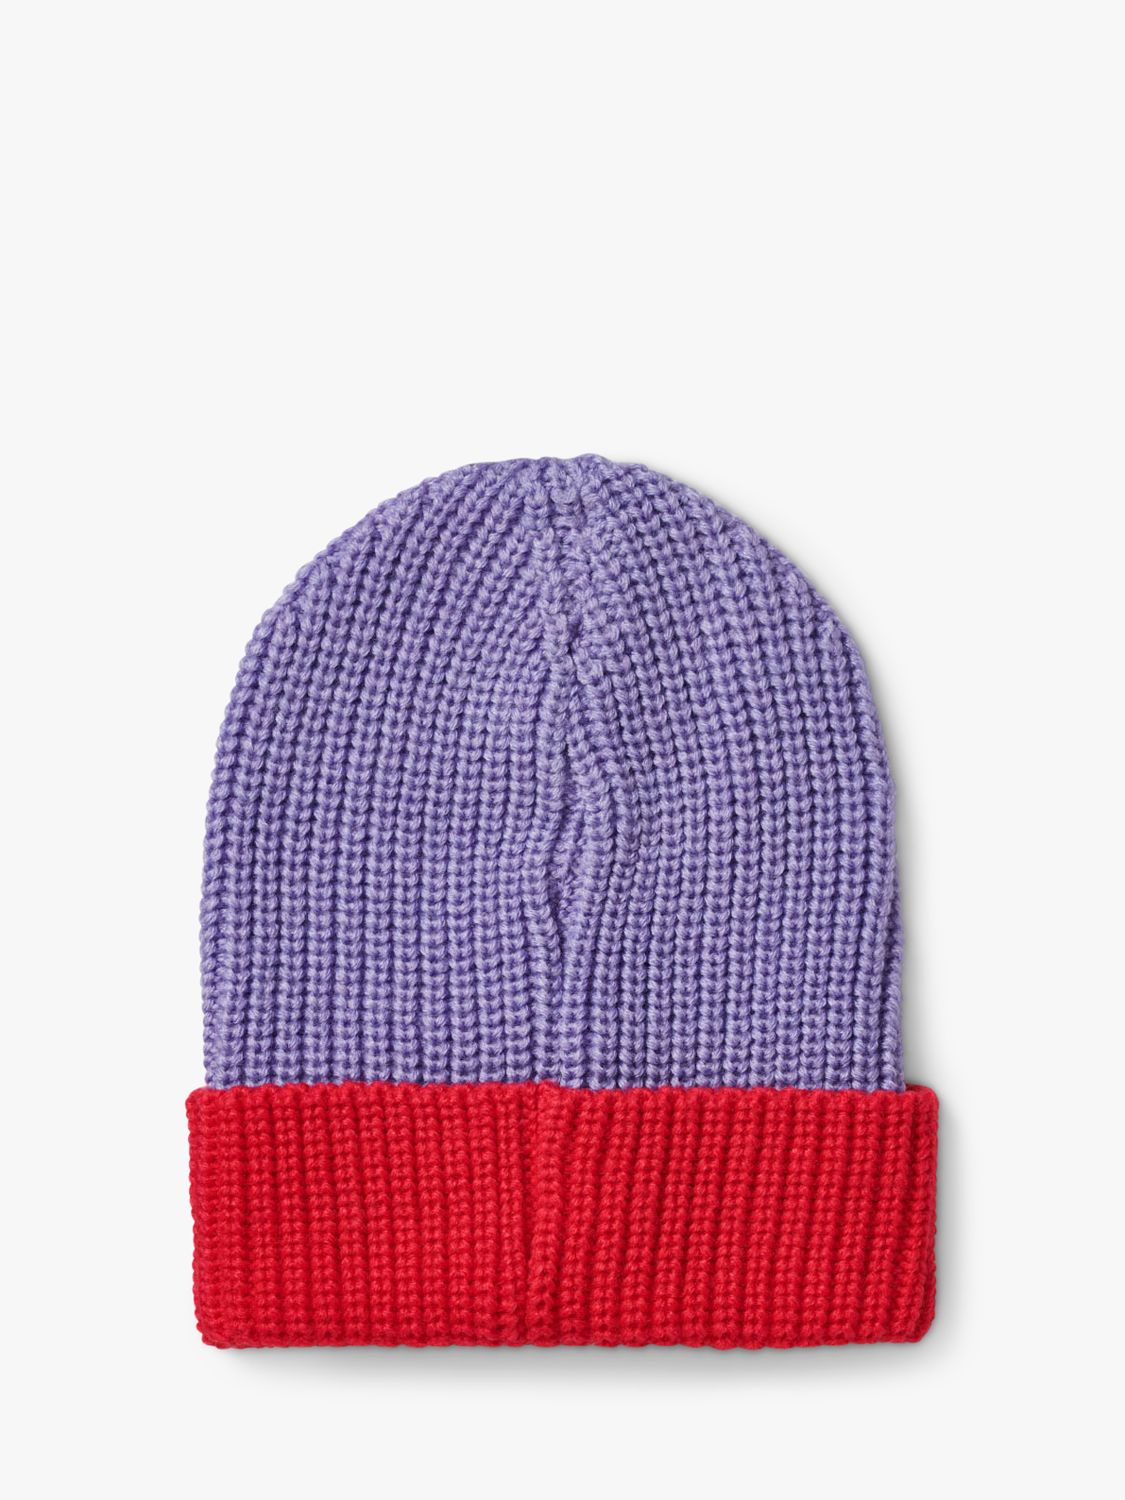 Small Stuff Kids' Initial Knitted Beanie Hat, Lilac, A at John Lewis ...